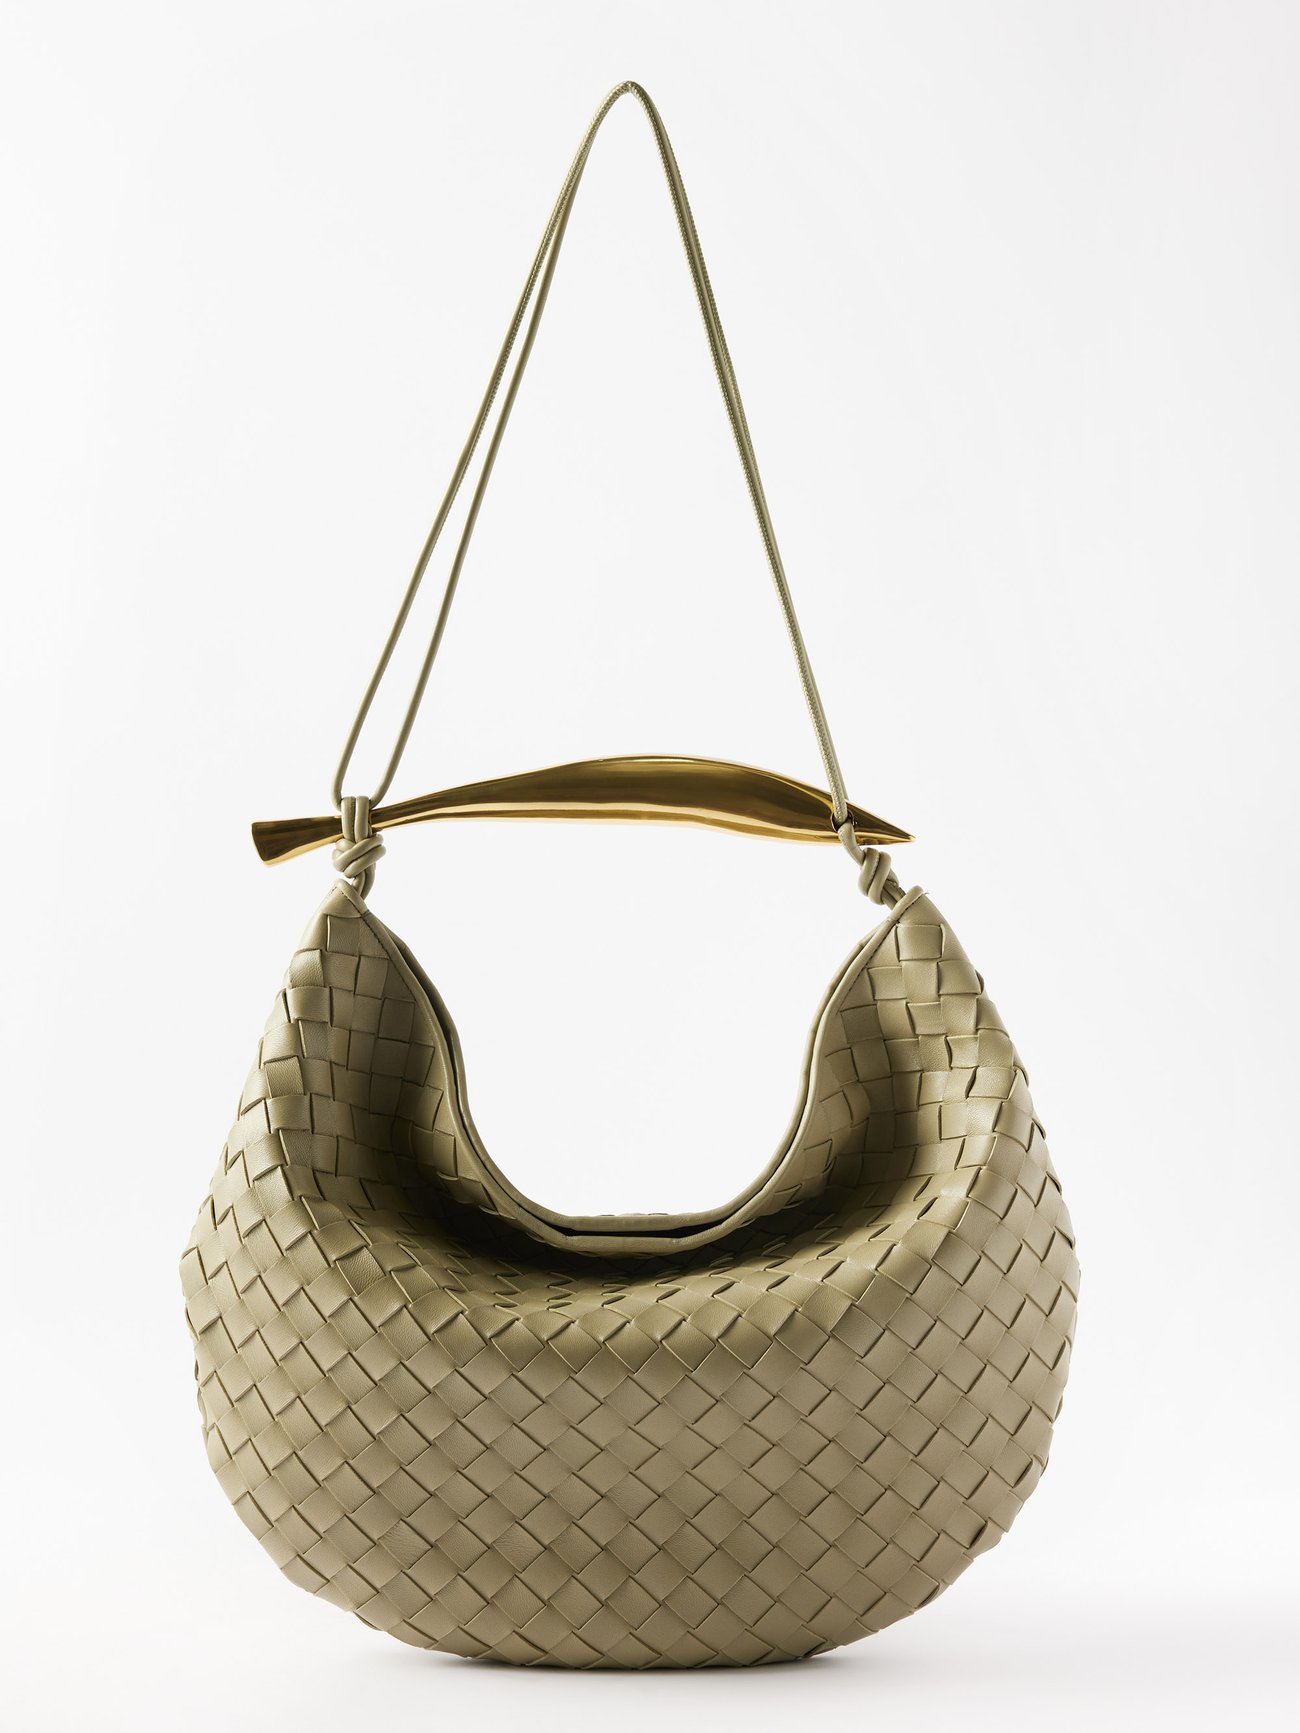 The muted green shade of this Sardine bag spotlights the mathematical precision of Bottega Veneta's hallmark Intrecciato-weaving technique, contrasted by the smooth metal fish-shaped handle.